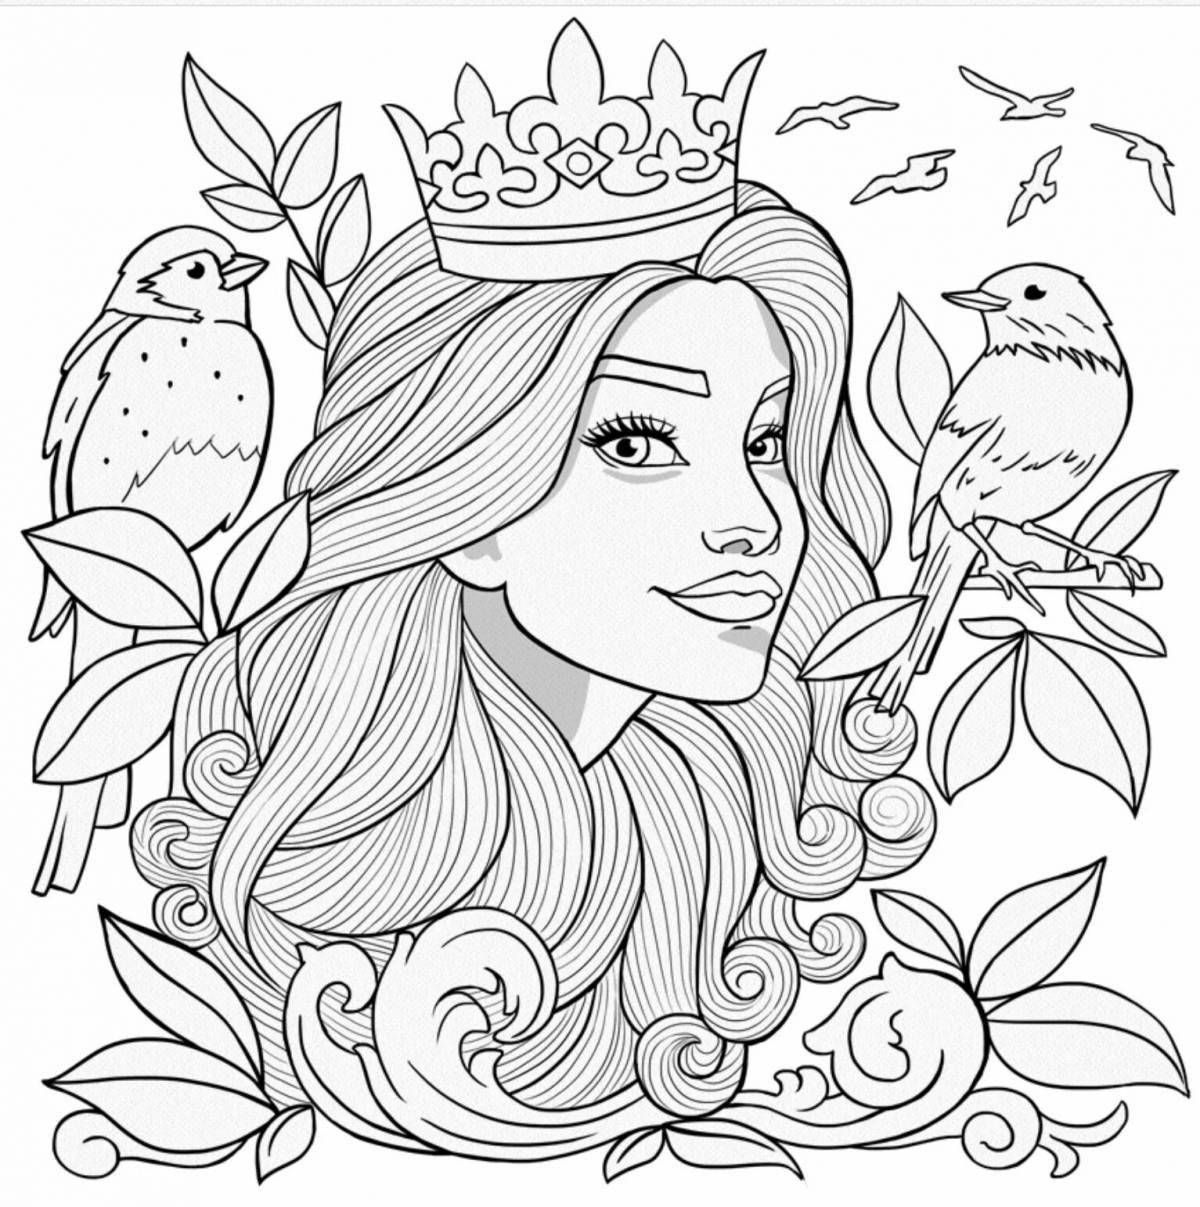 Amazing coloring book for girls 10-11 years old